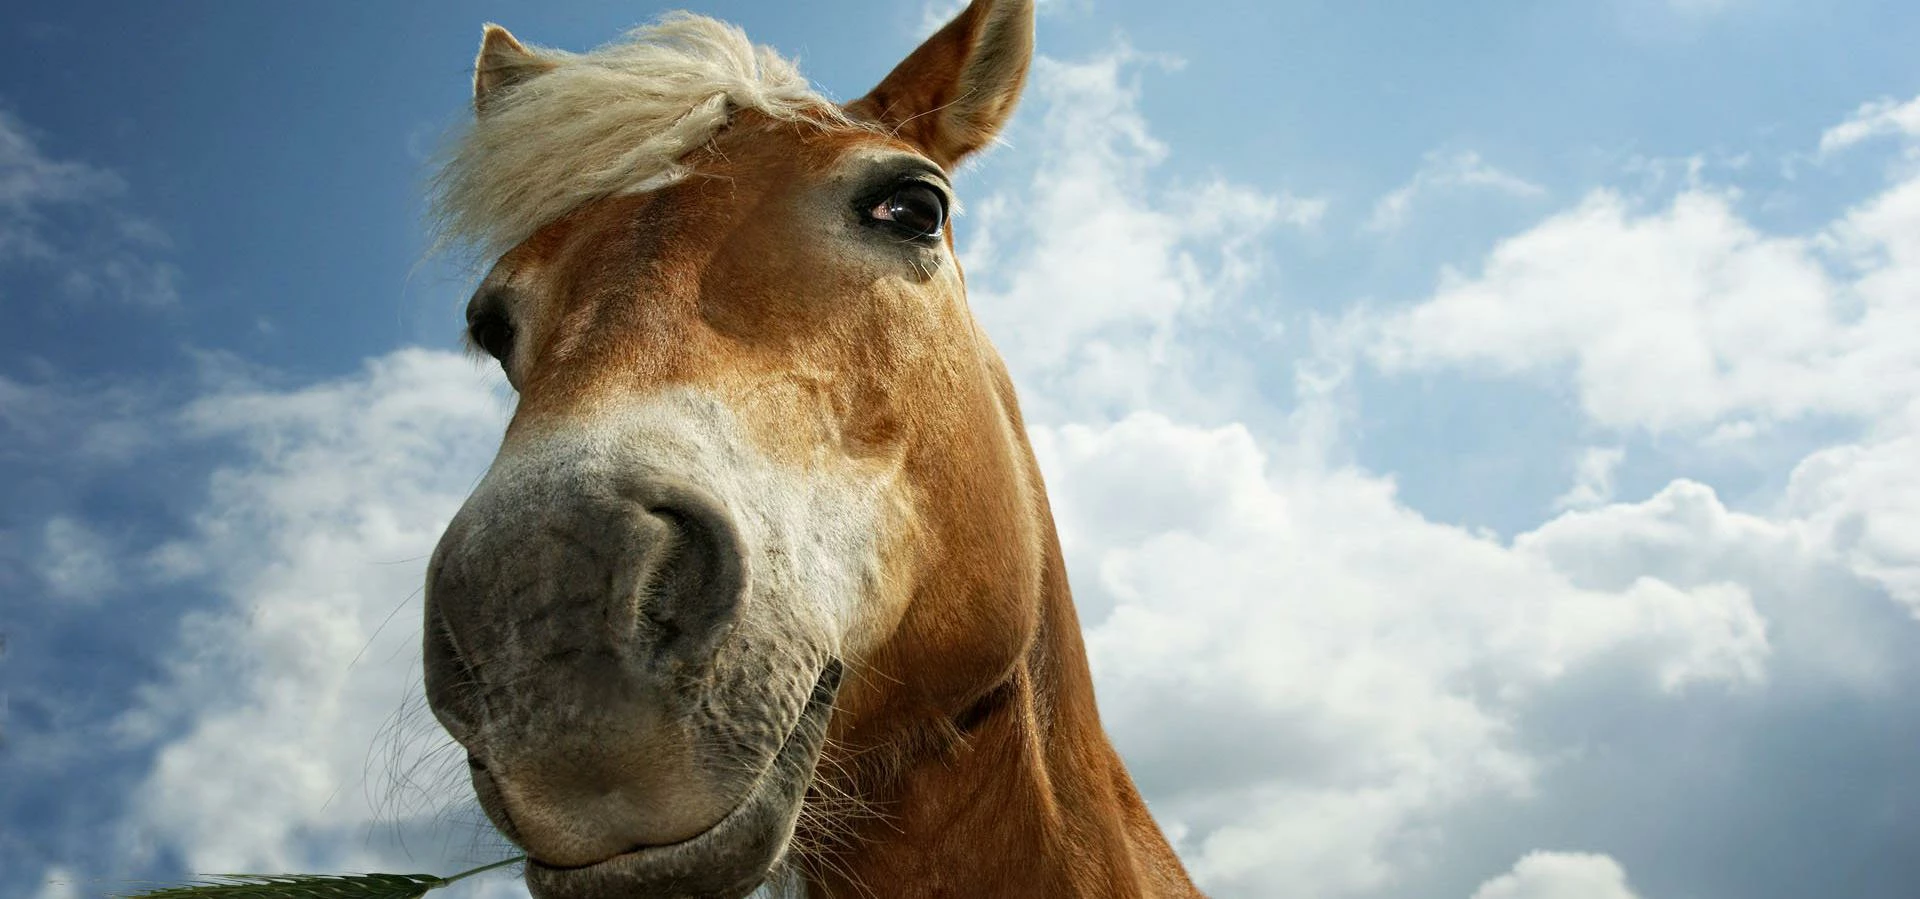 Beware - This stalking horse can seriously unseat your sales efforts!